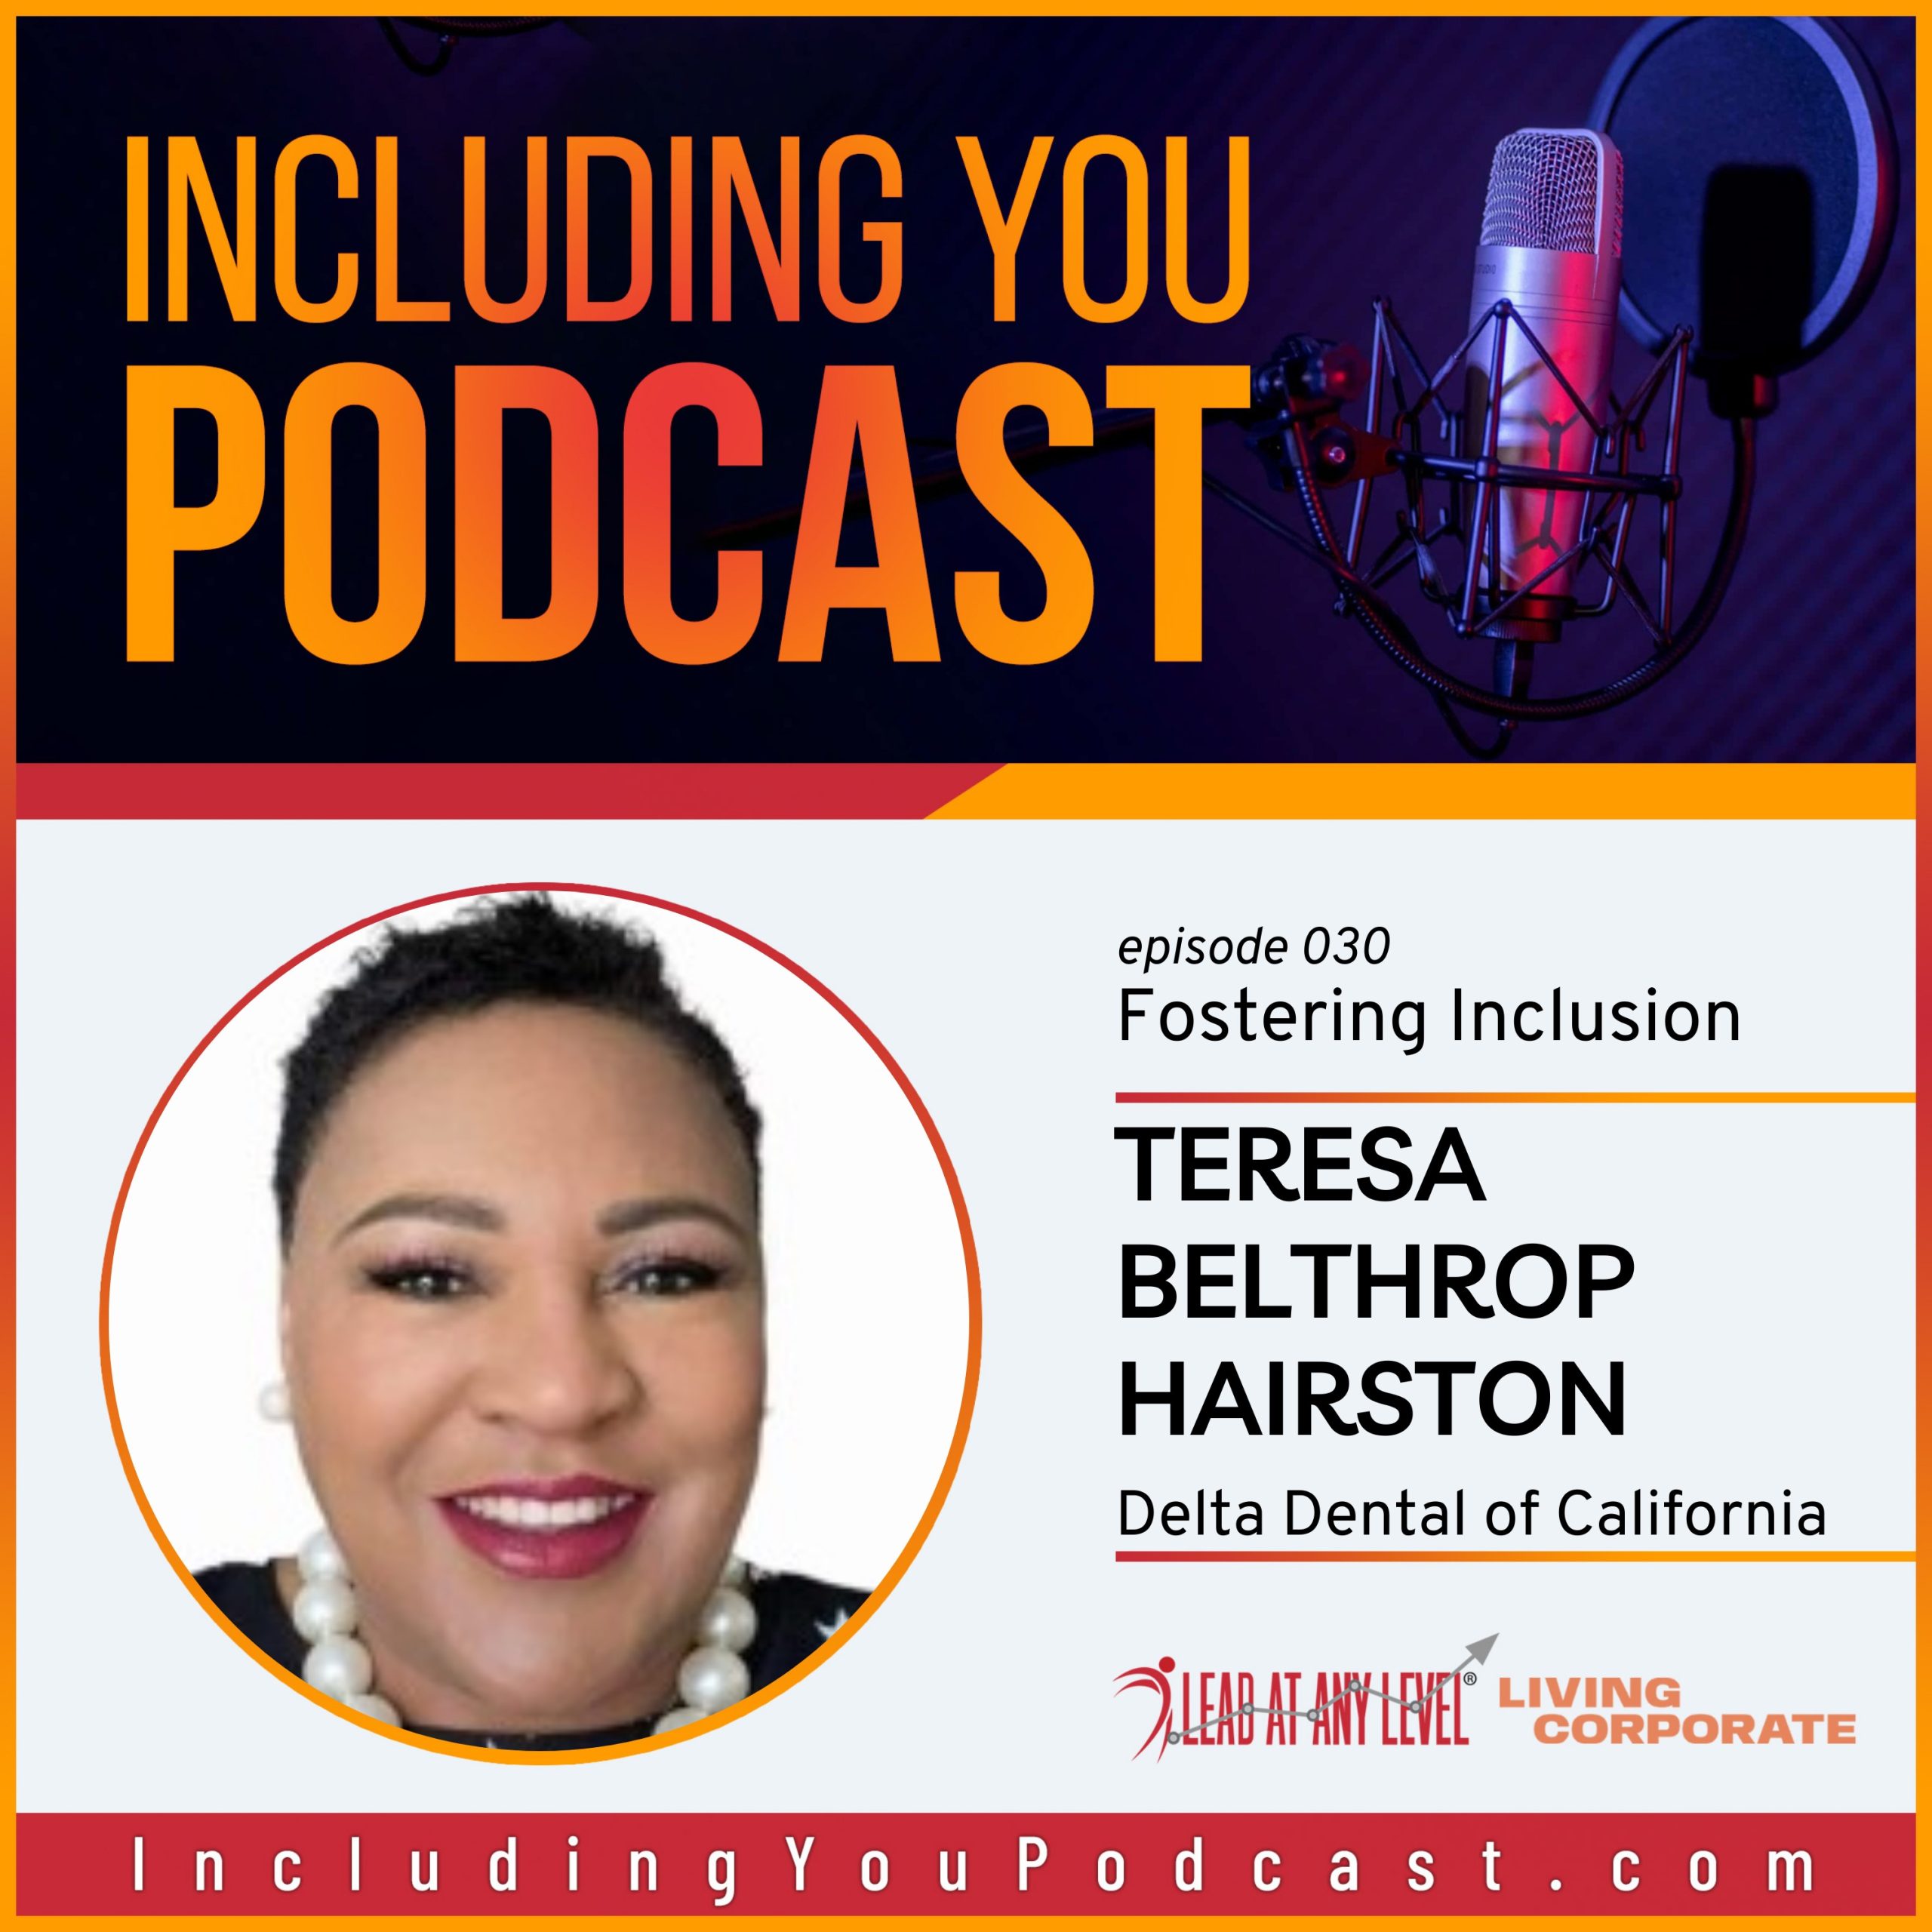 e030. Fostering Inclusion with Teresa Belthrop Hairston